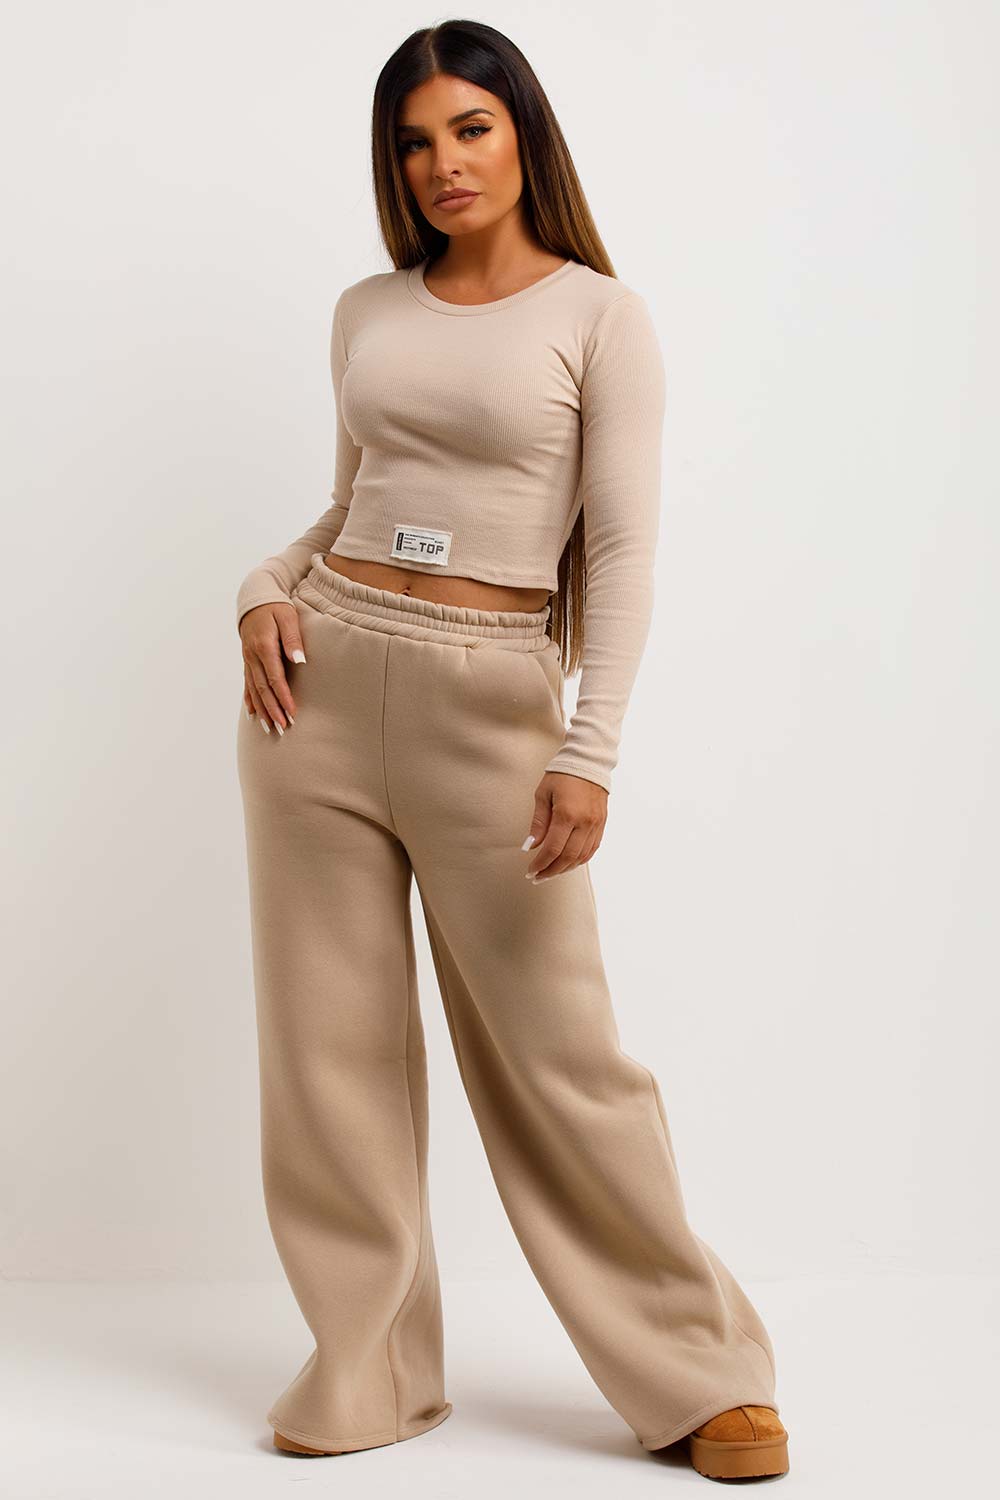 womens wide leg joggers and top co ord set